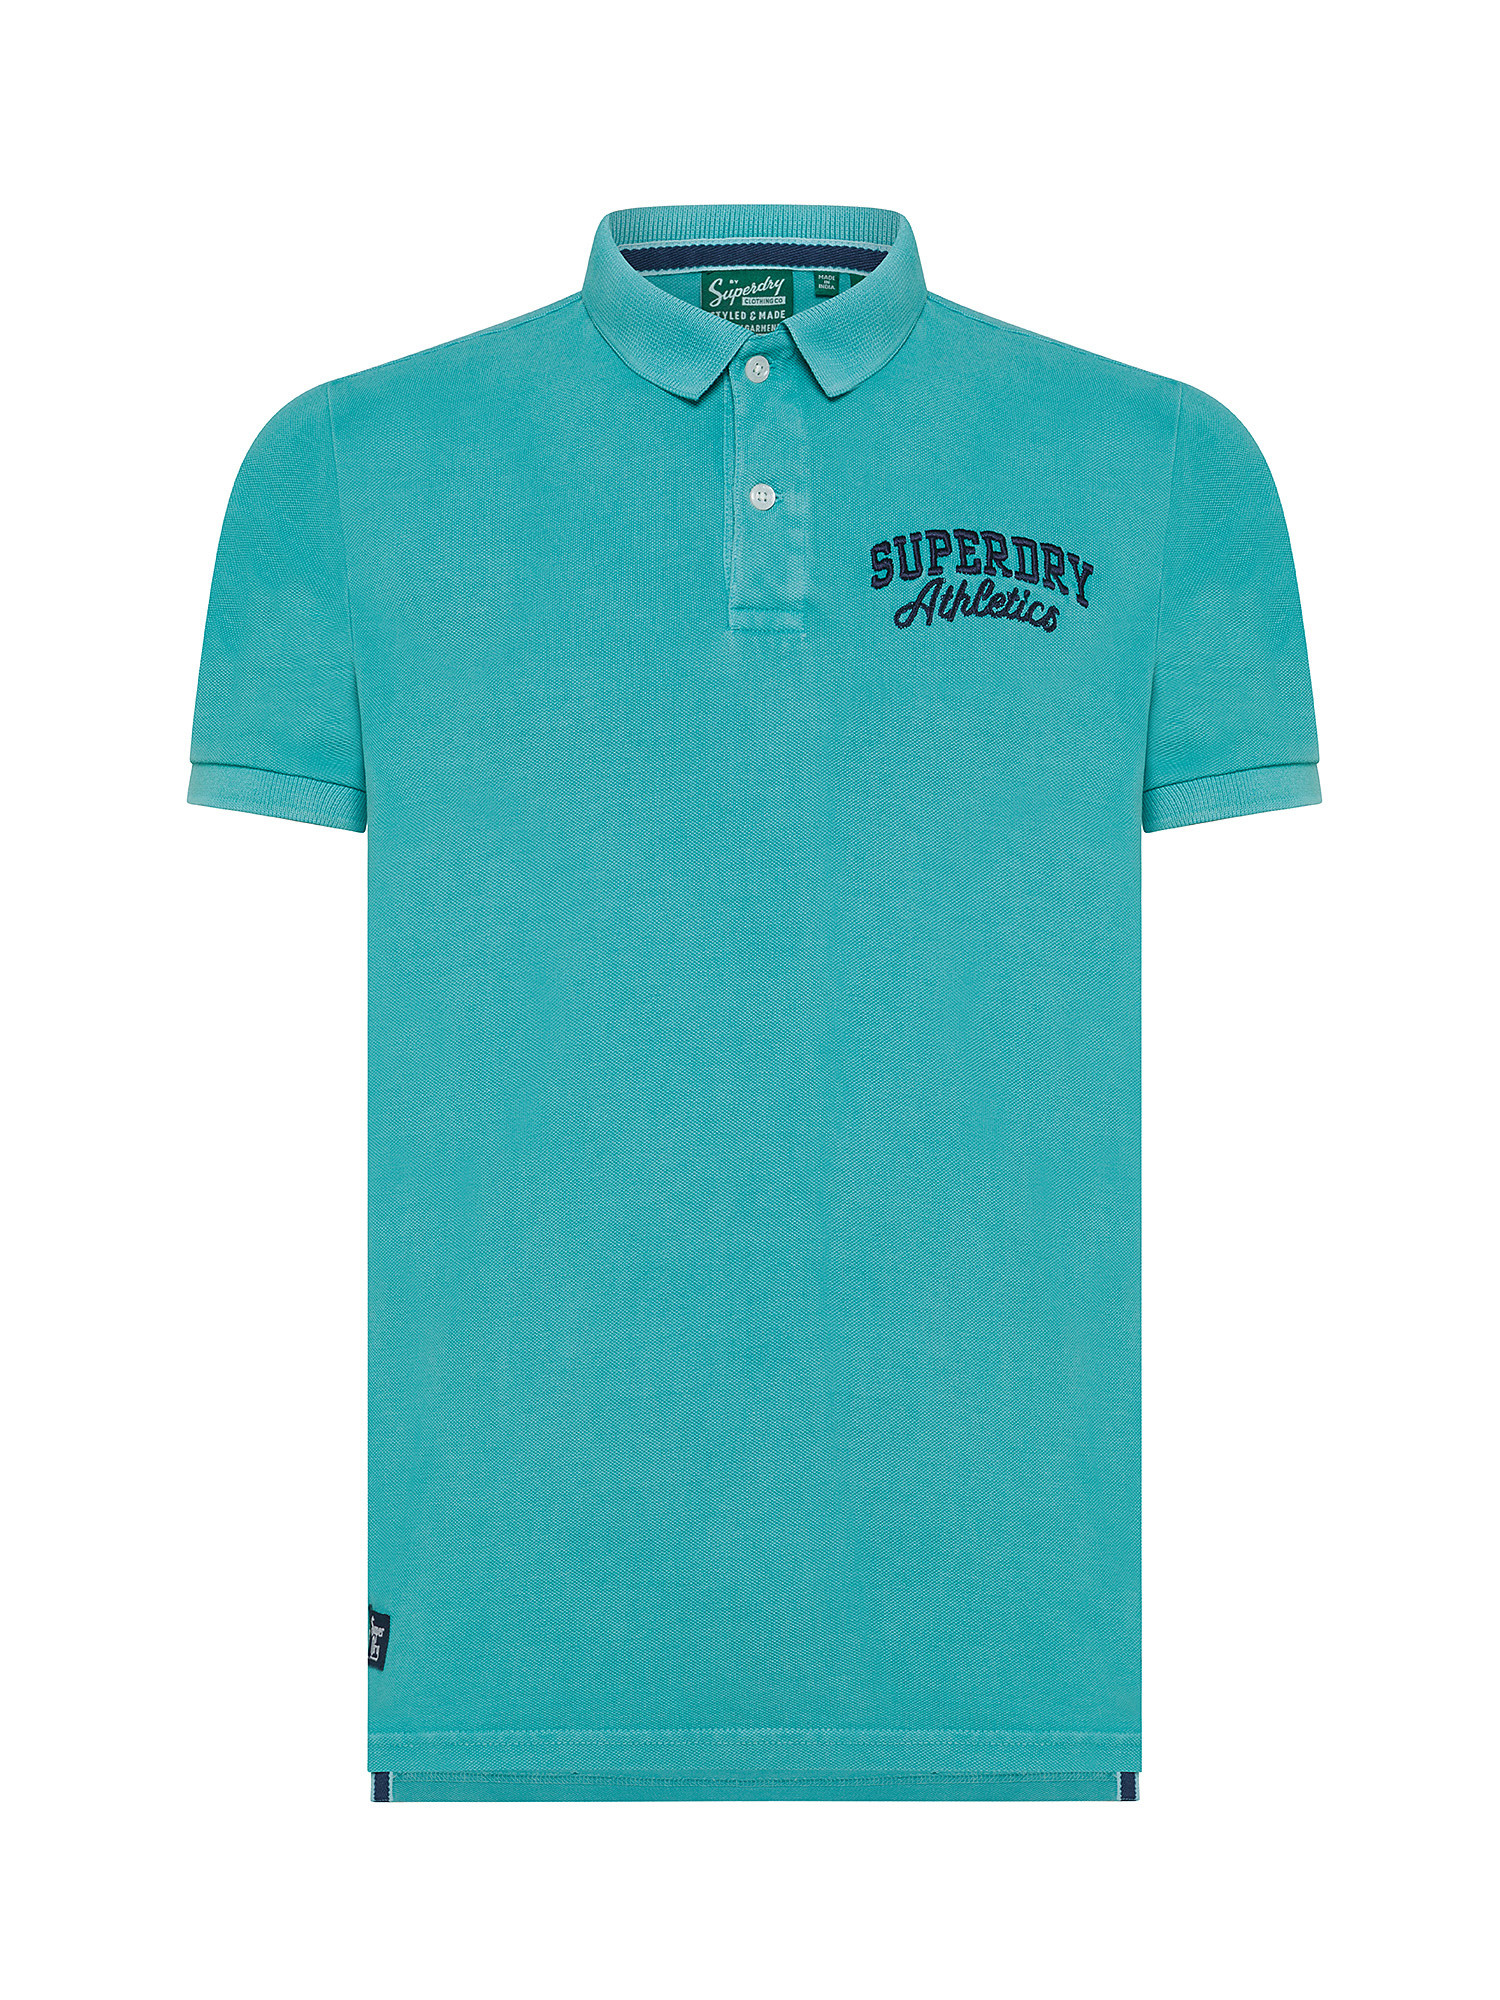 Superdry - Cotton piqué polo shirt with logo, Light Blue, large image number 0